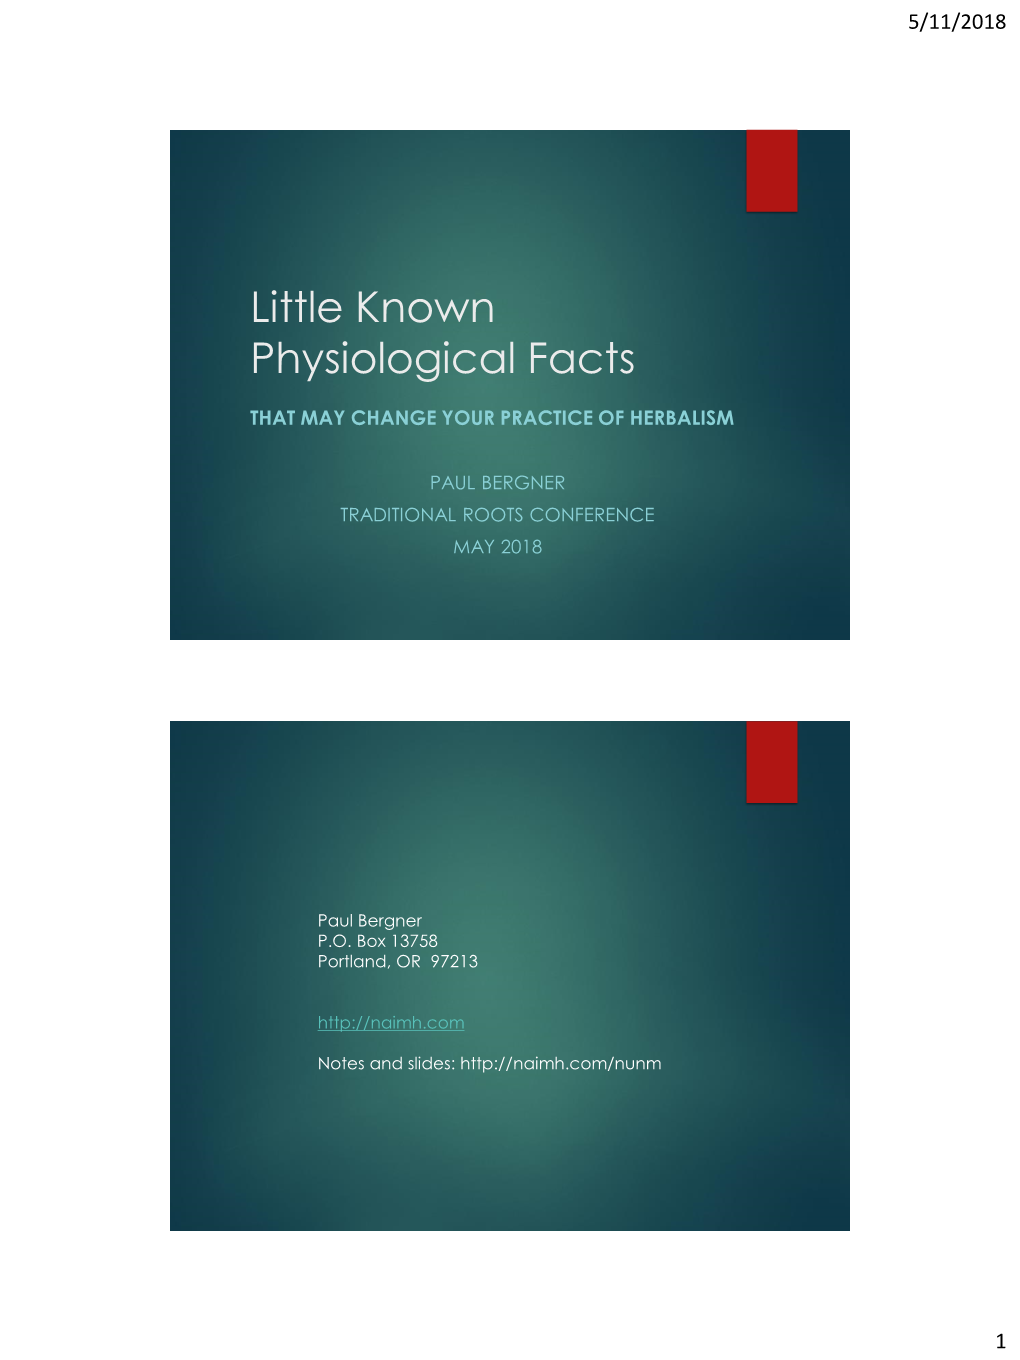 Little Known Physiological Facts